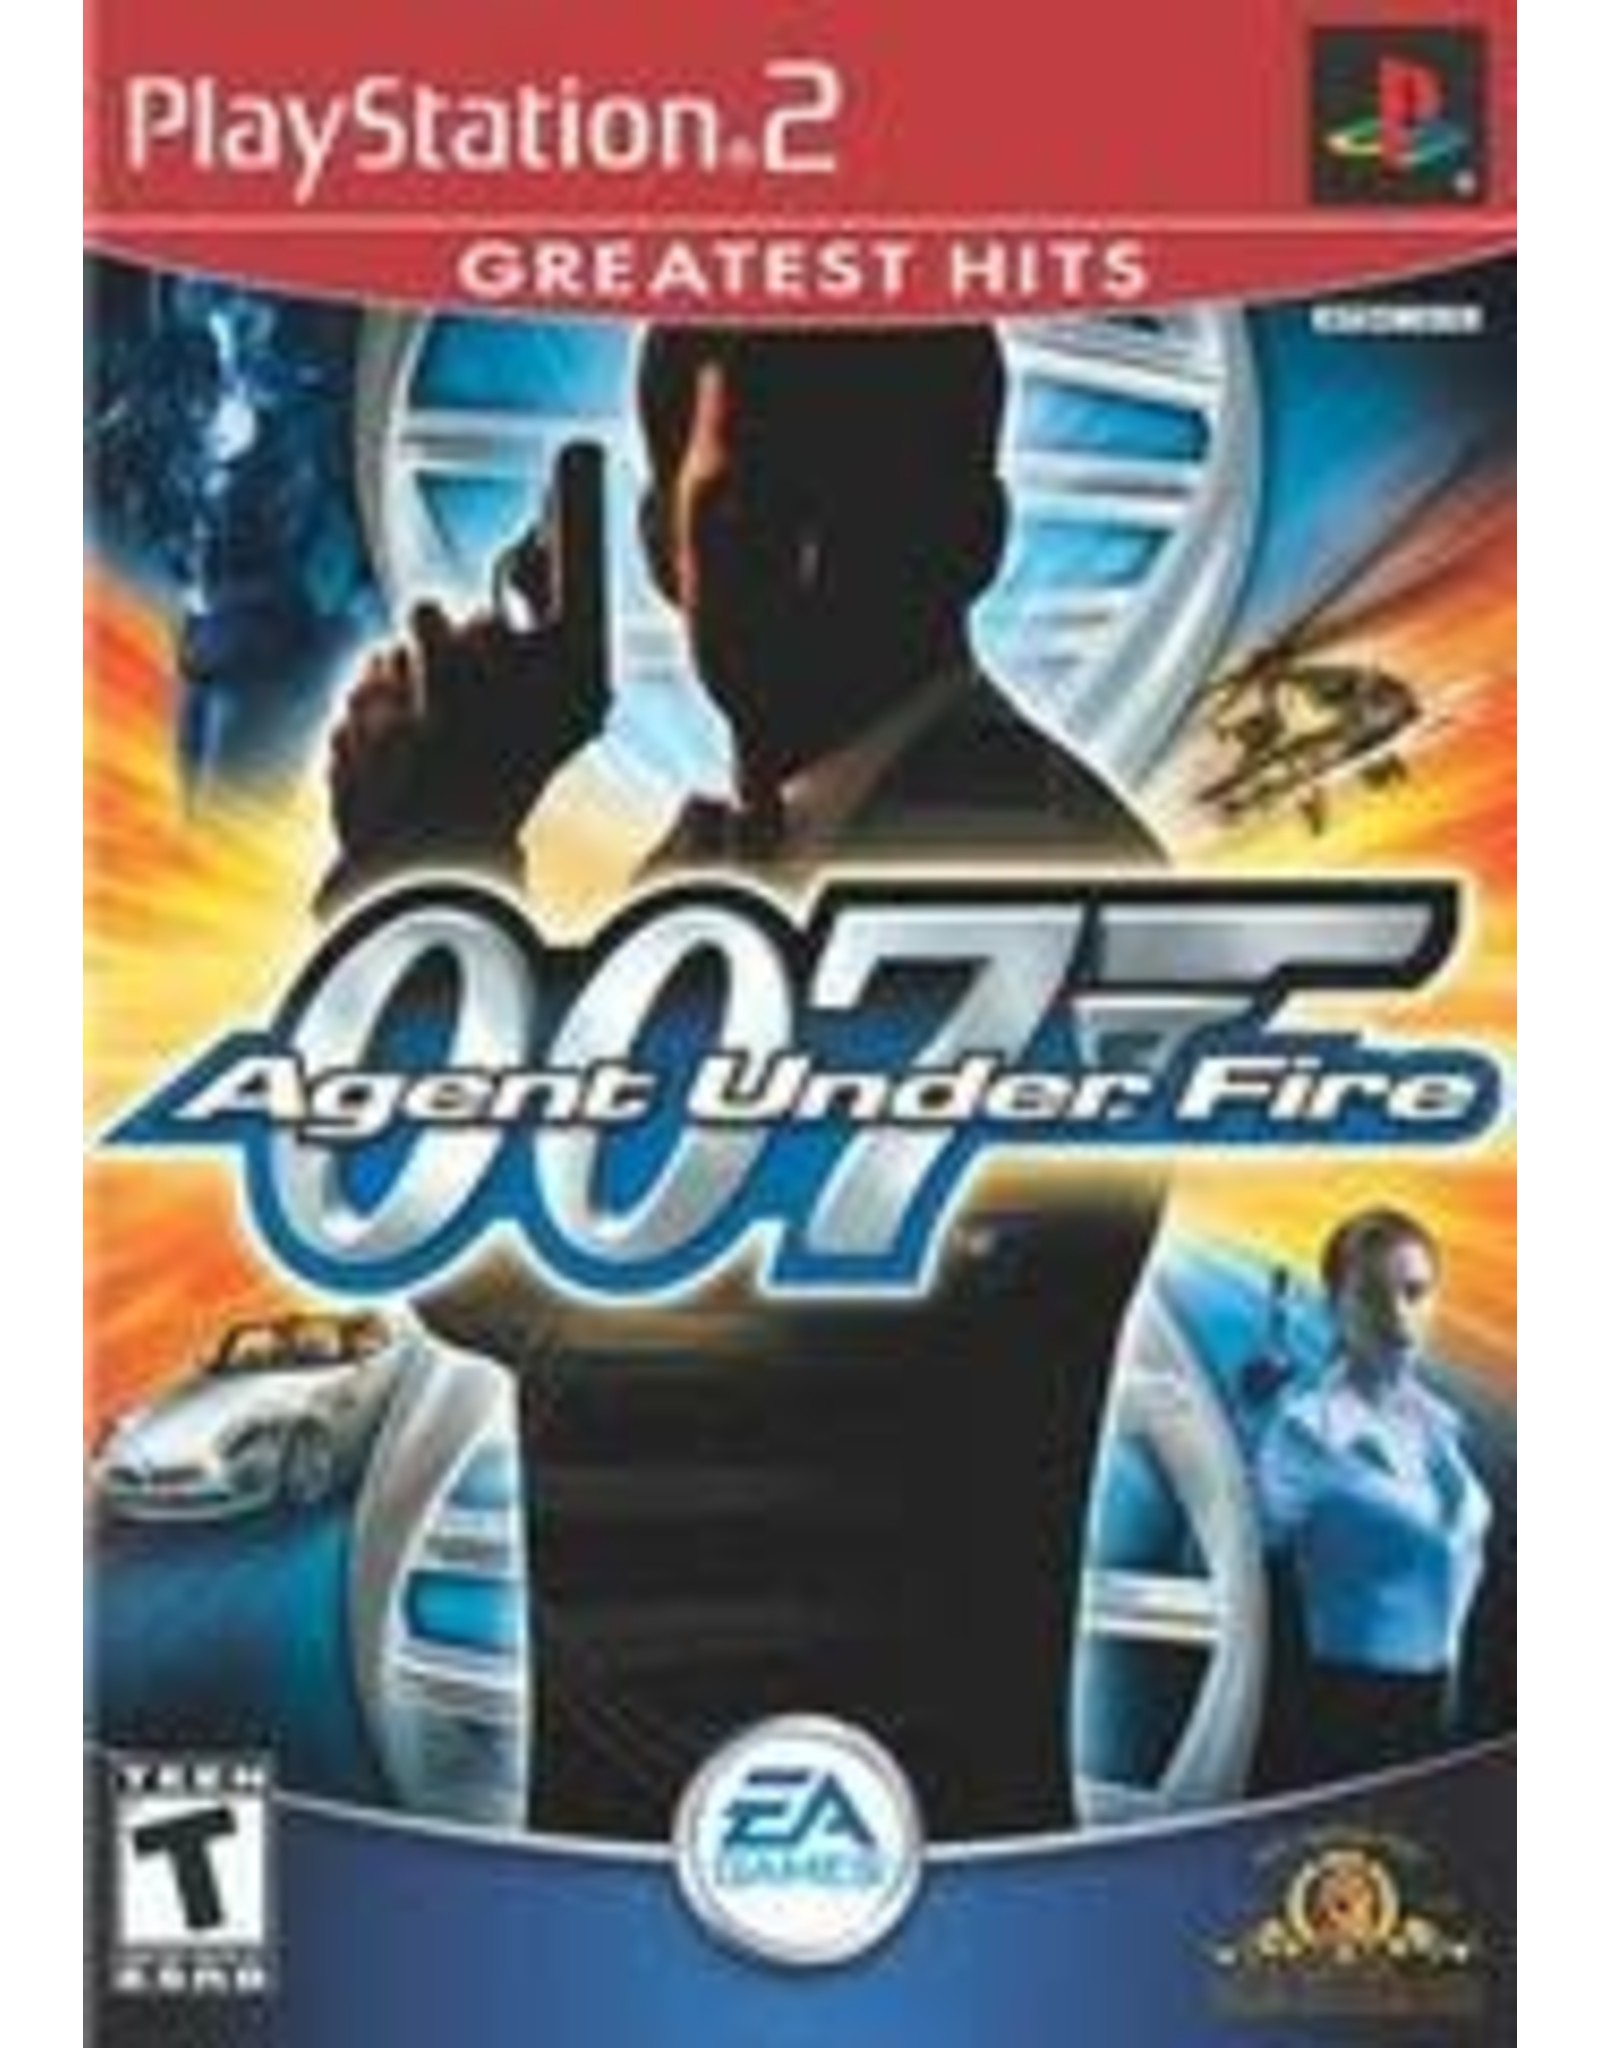 Playstation 2 007 Agent Under Fire - Greatest Hits (Used)